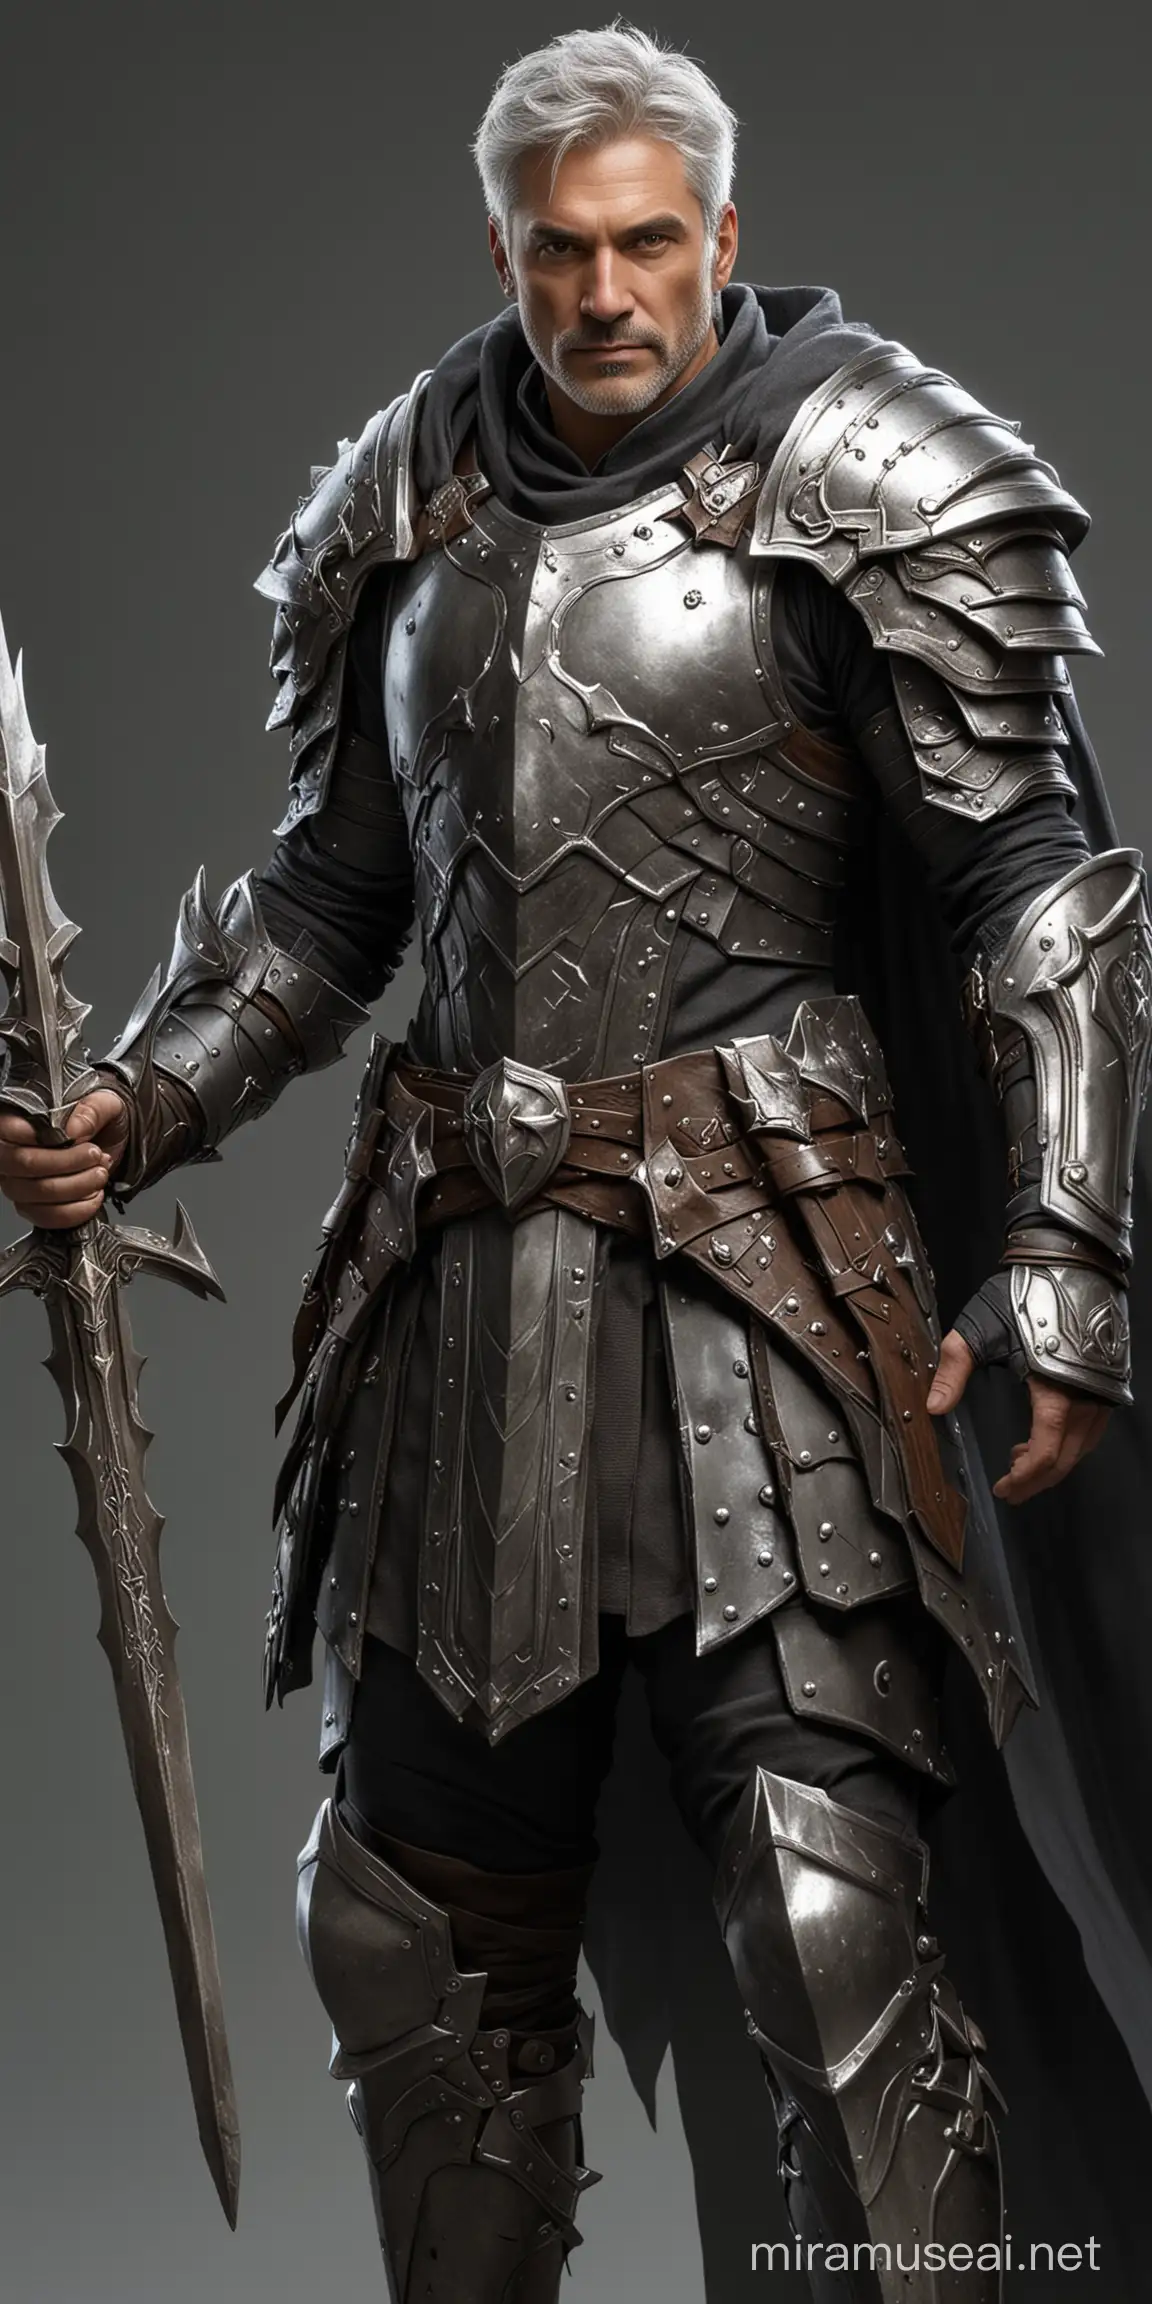 Human paladin, 50 years old man,handsome, partially grey hair, heavy armor, holding halberd and shield